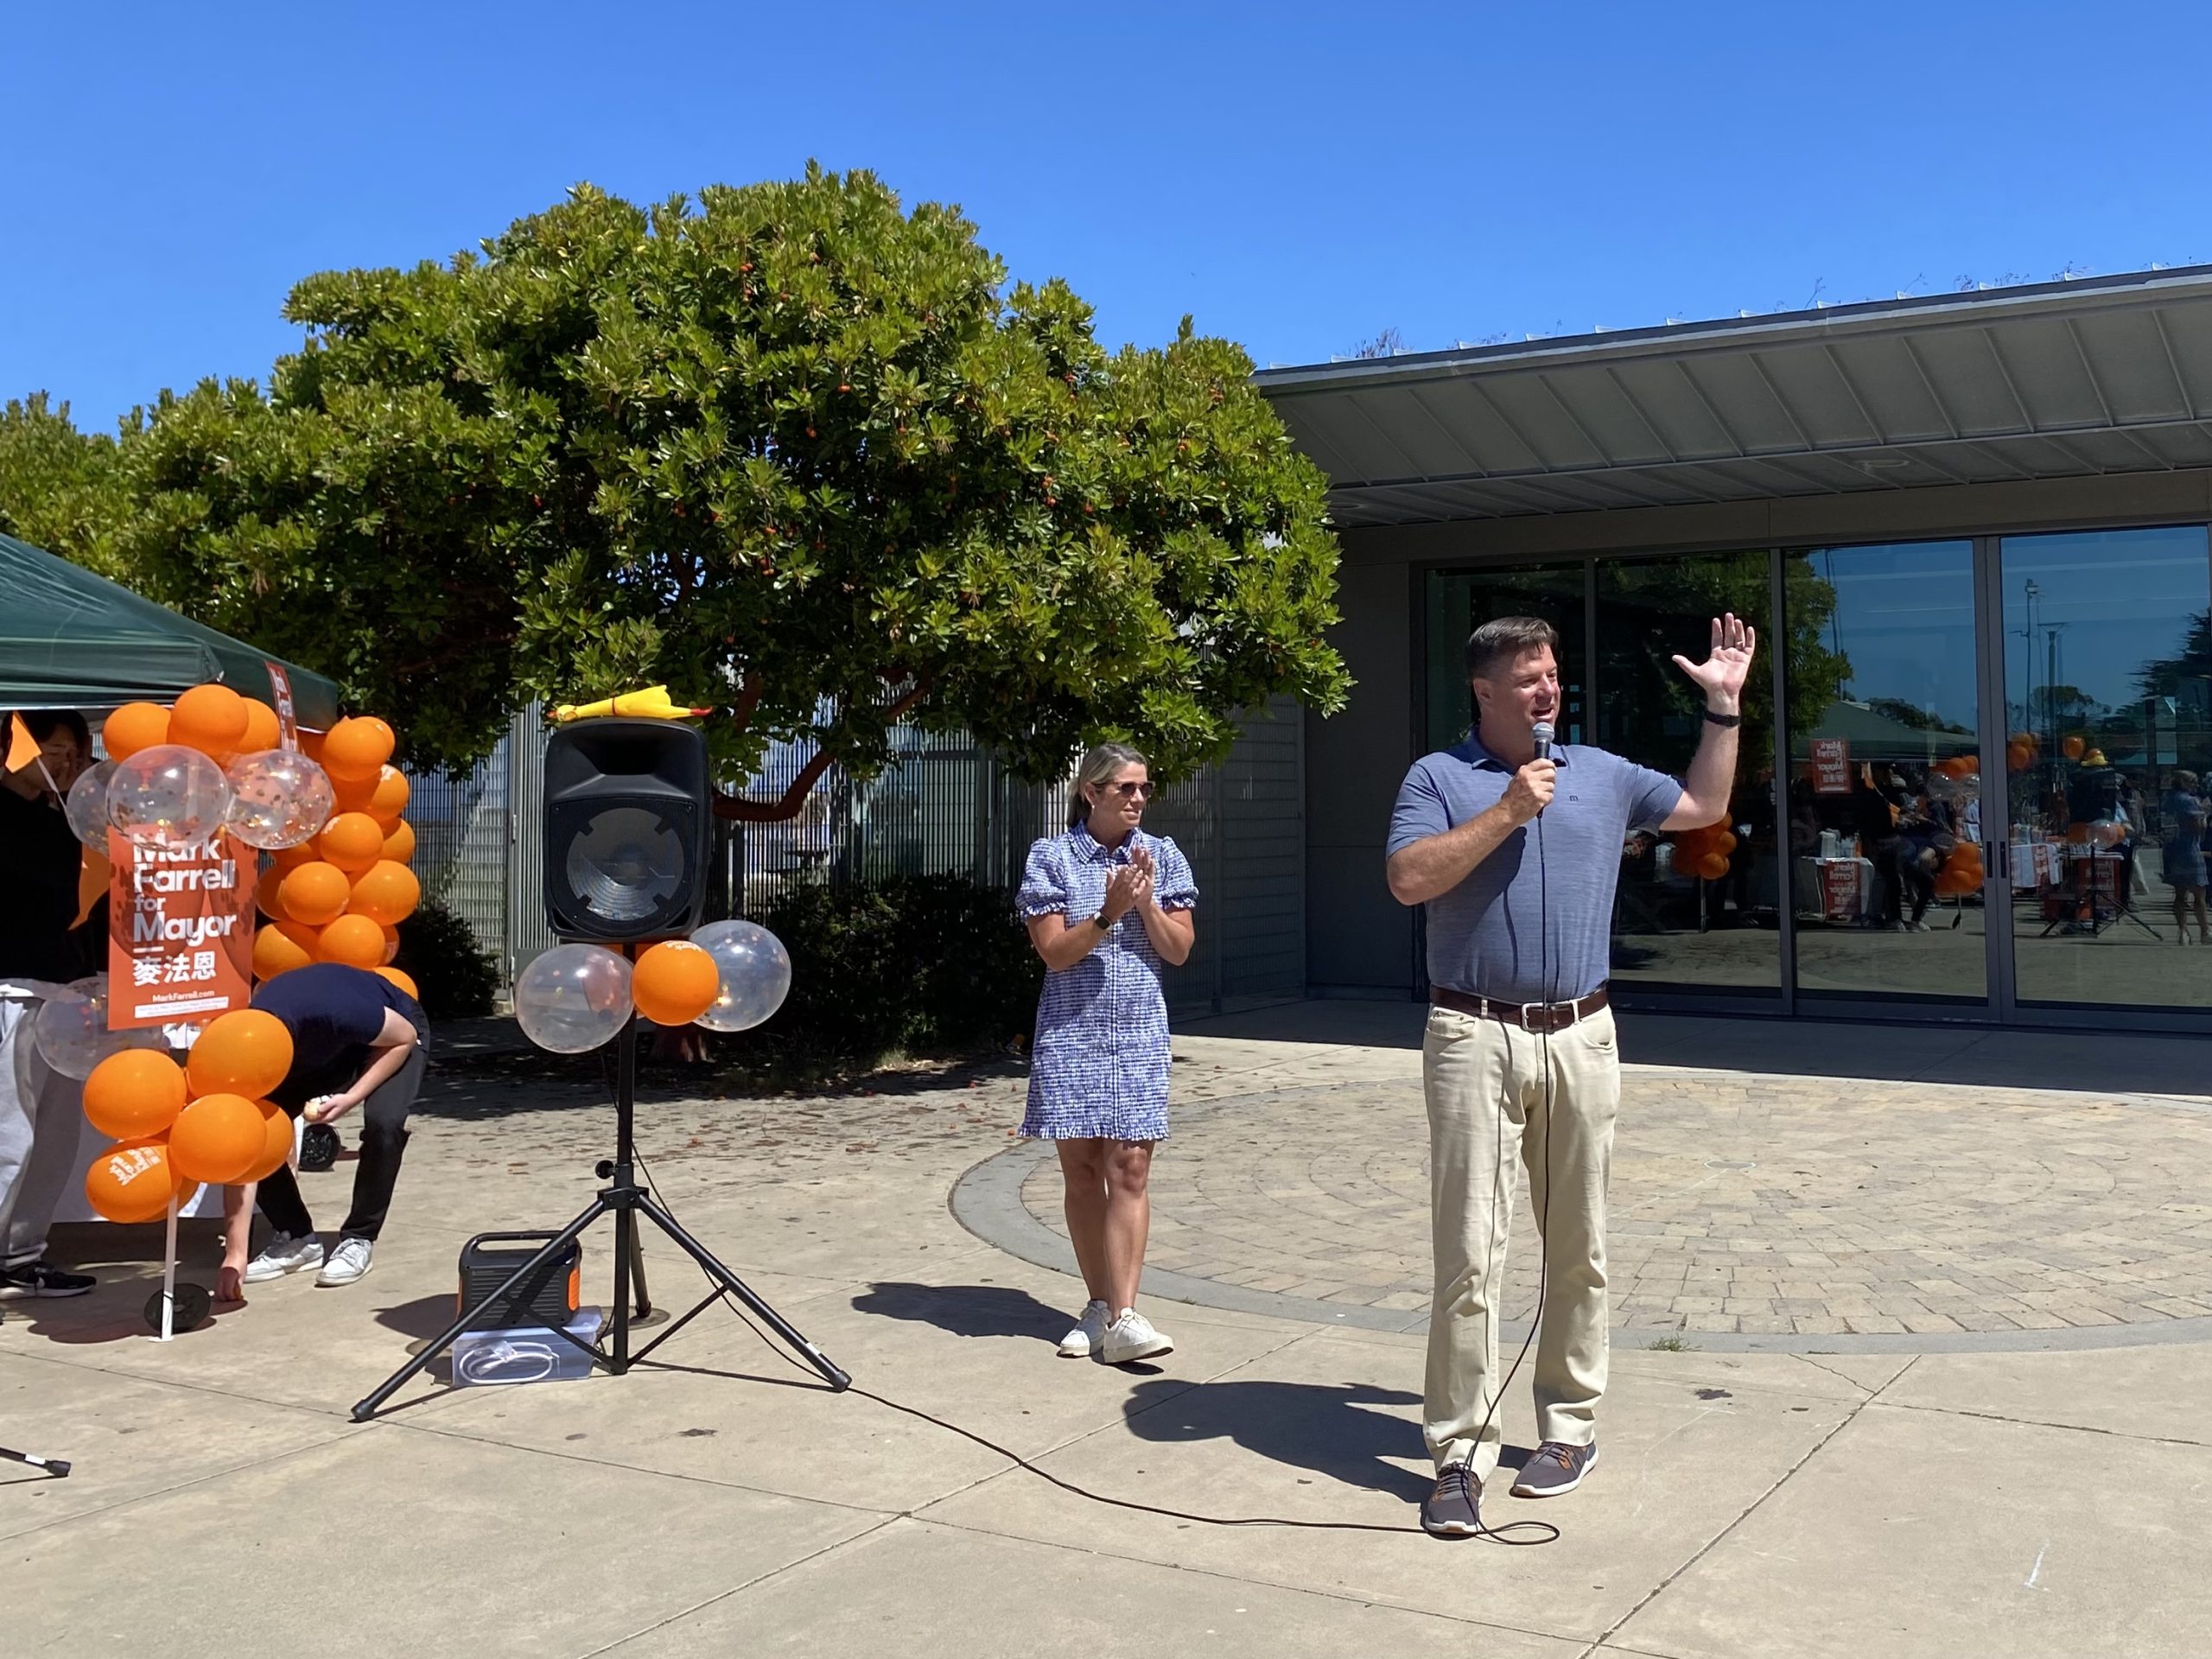 Mark Farrell speaks into a microphone, gesturing with one hand, while another person stands nearby clapping in front of a building. Orange and white balloons and a tree are in the background.